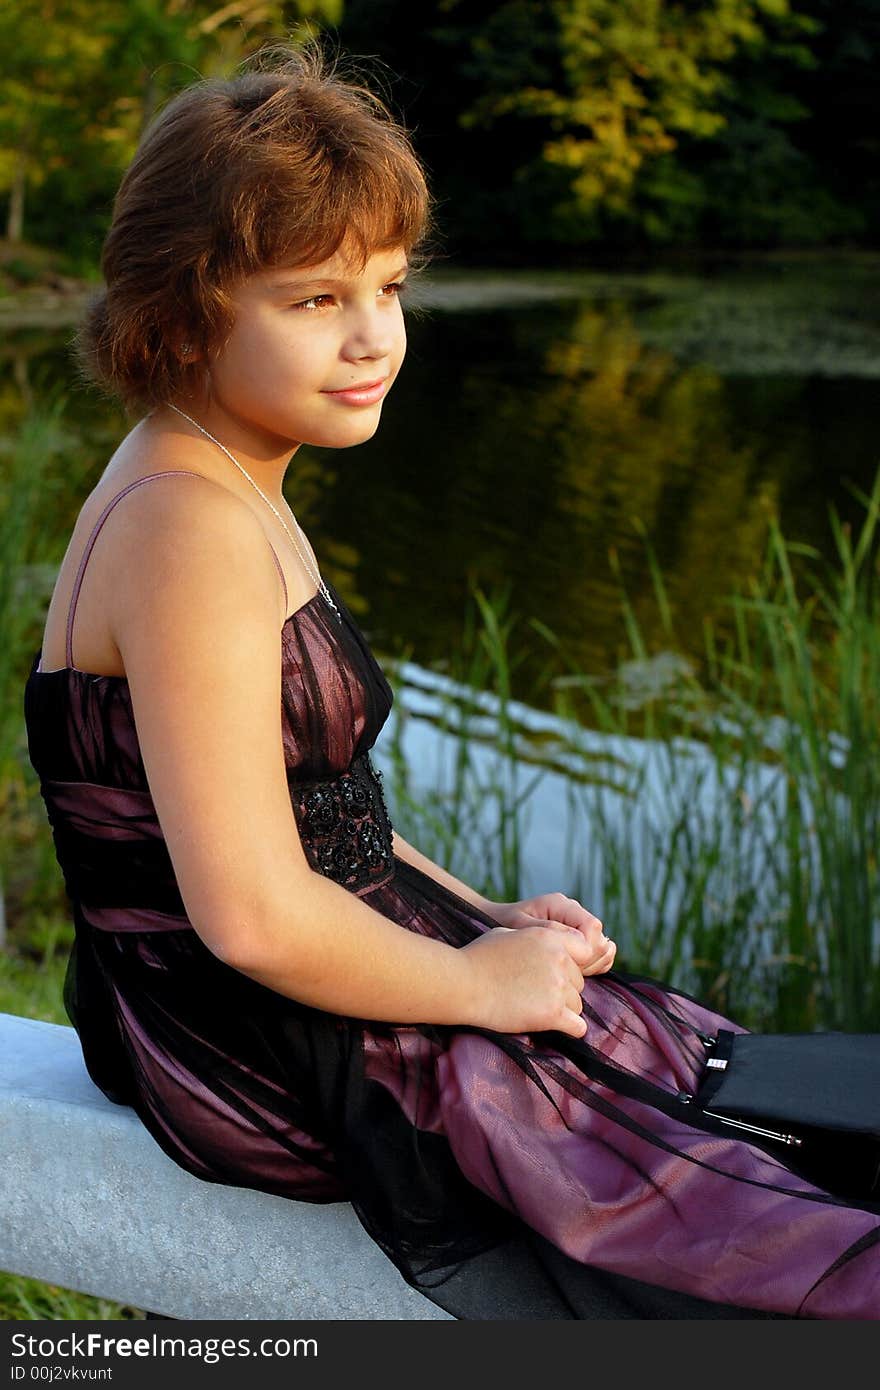 Elementary girl in formal wear gazing into the distance from a pond in late afternoon. Elementary girl in formal wear gazing into the distance from a pond in late afternoon.